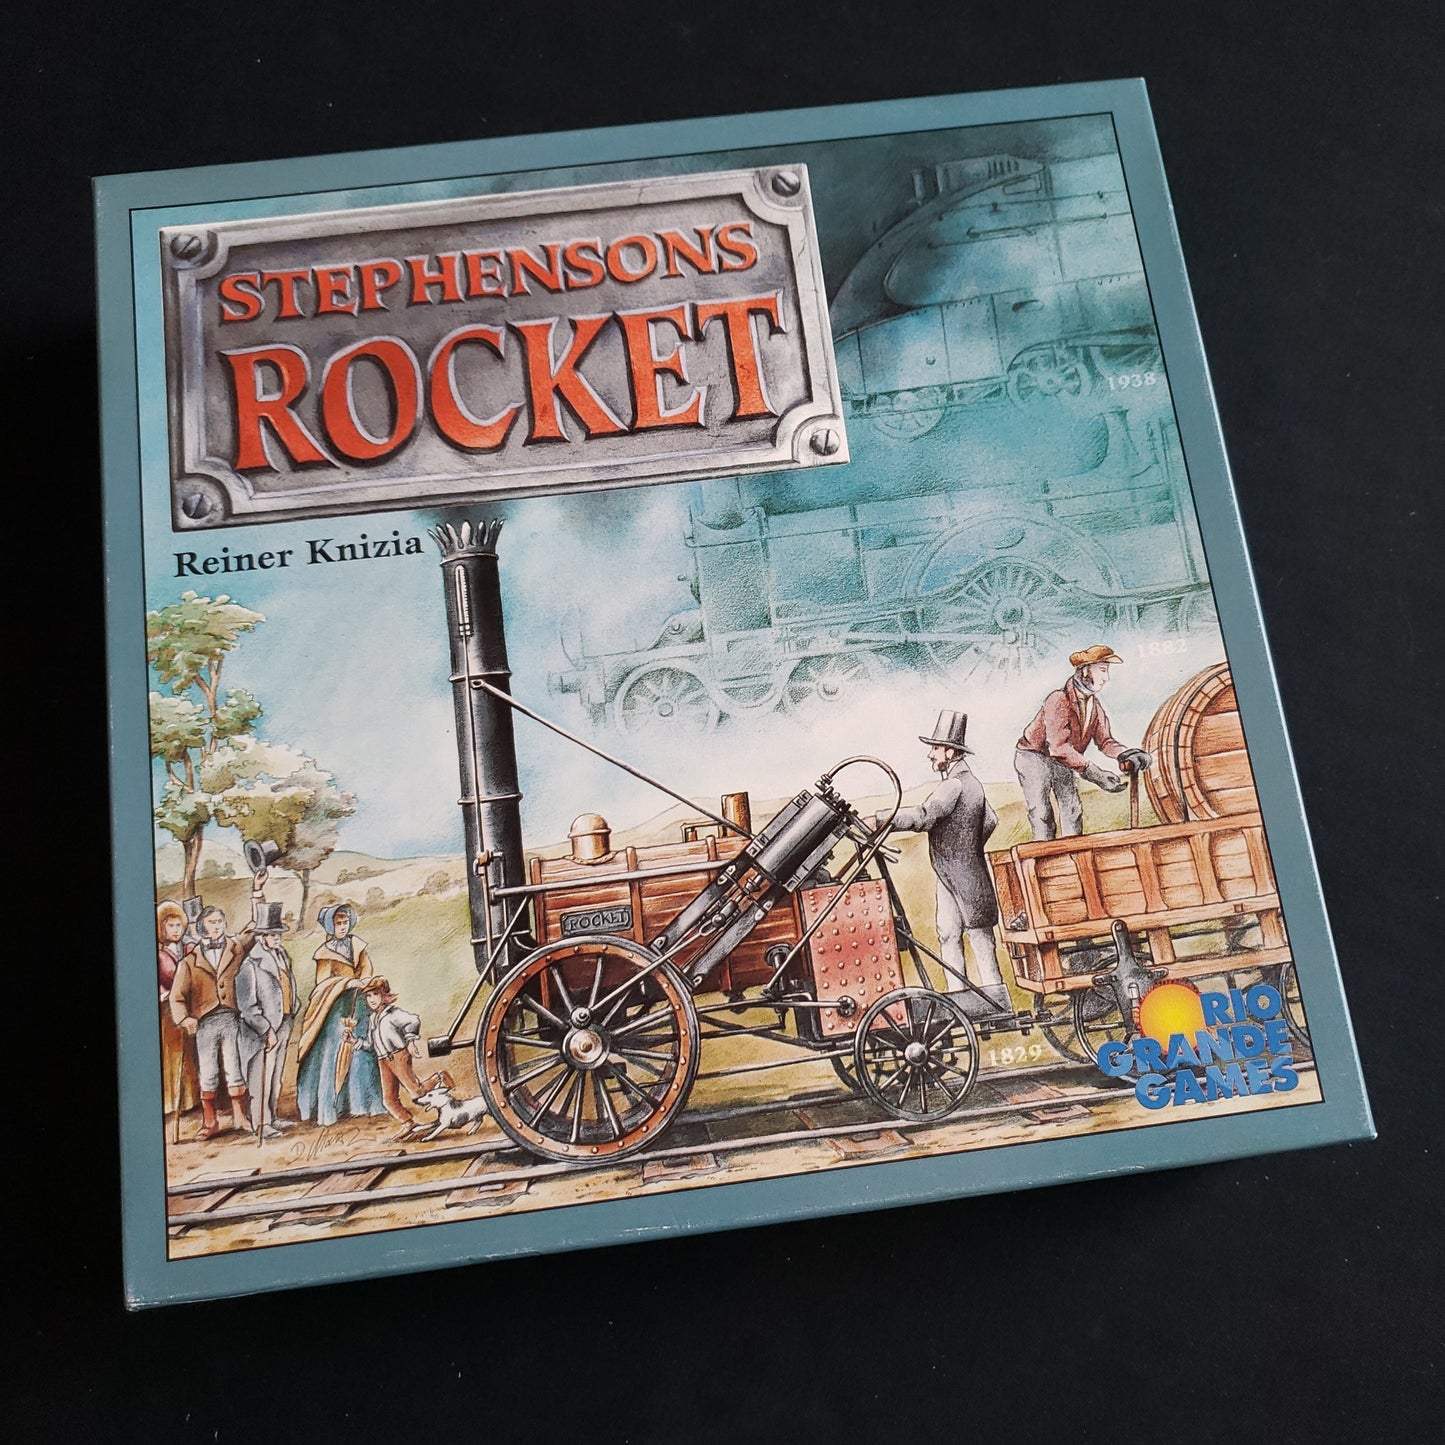 Image shows the front cover of the box of the Stephenson's Rocket board game